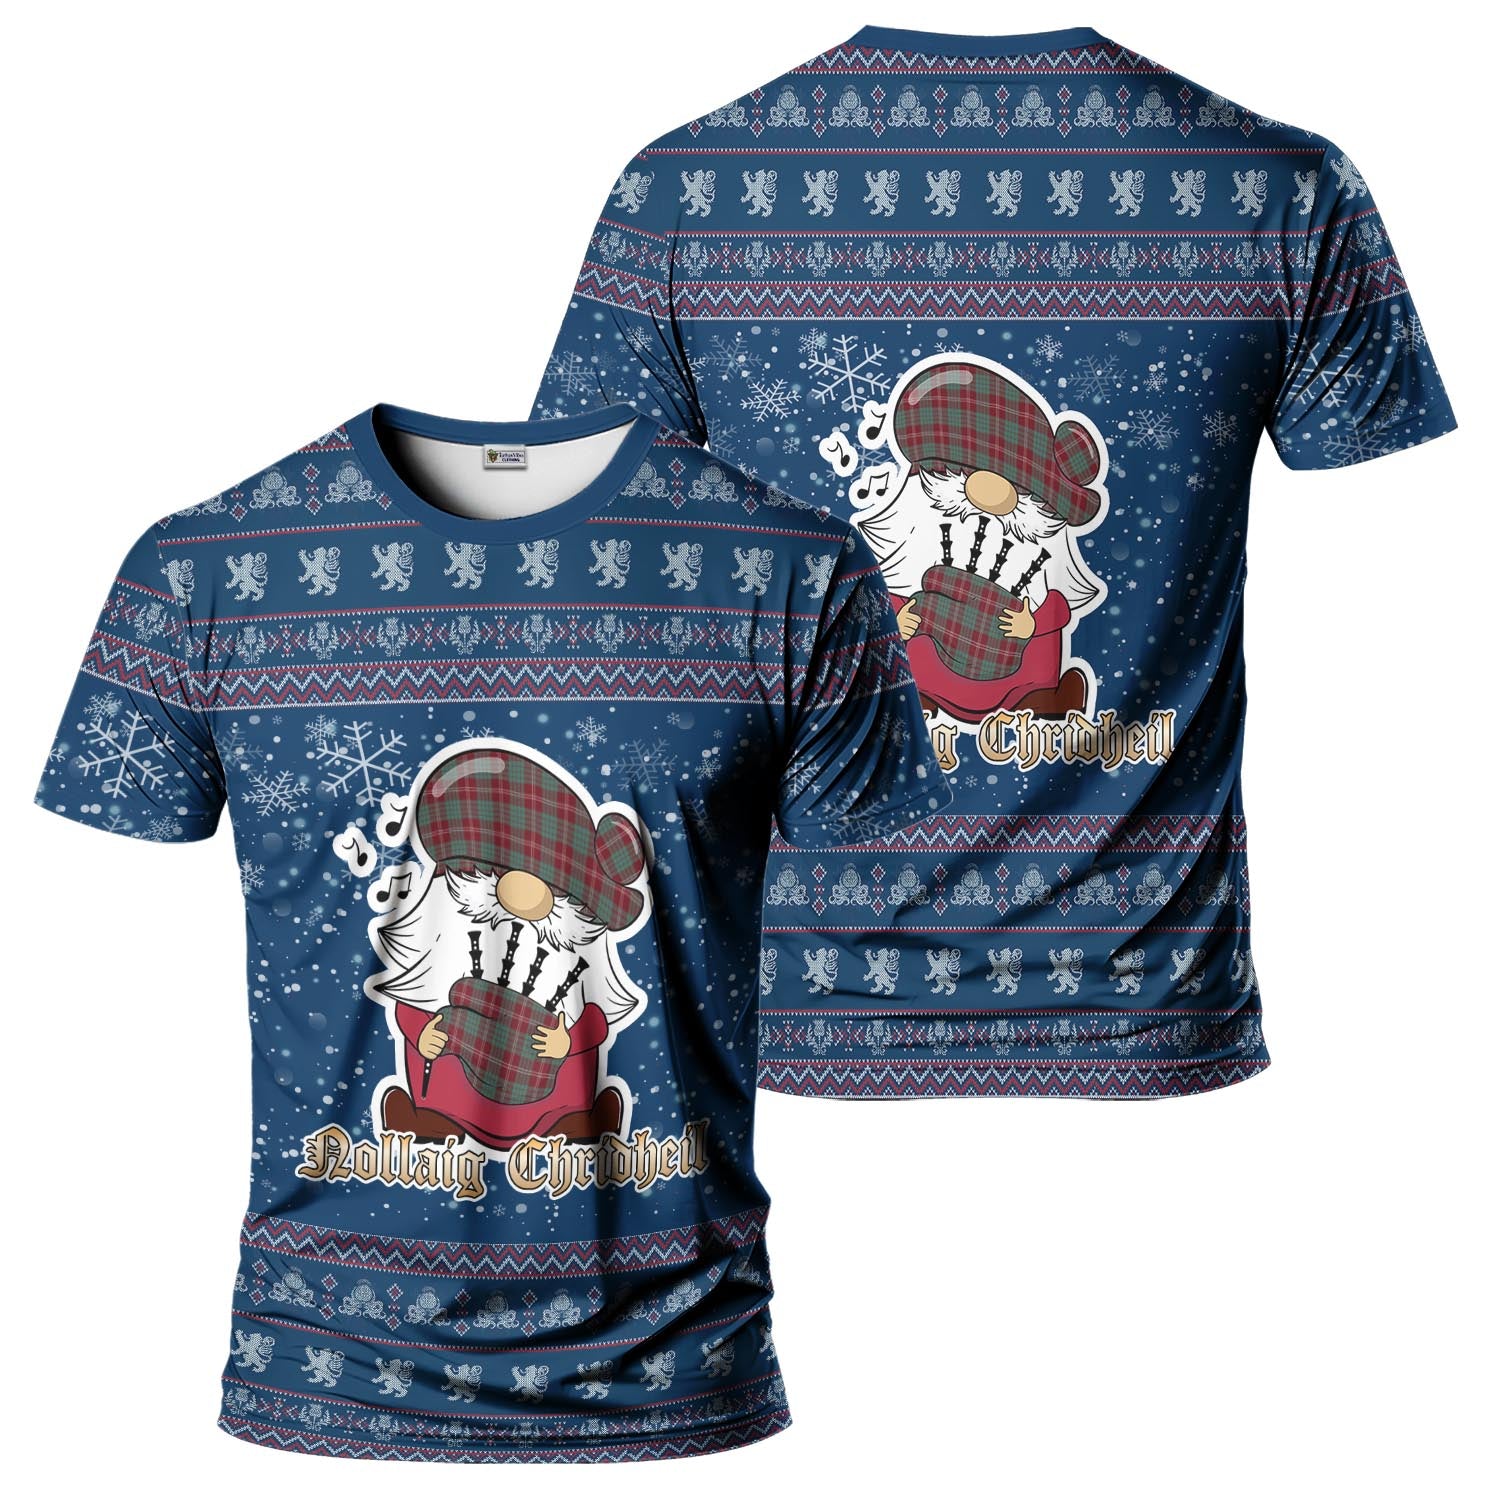 Crawford Modern Clan Christmas Family T-Shirt with Funny Gnome Playing Bagpipes Kid's Shirt Blue - Tartanvibesclothing